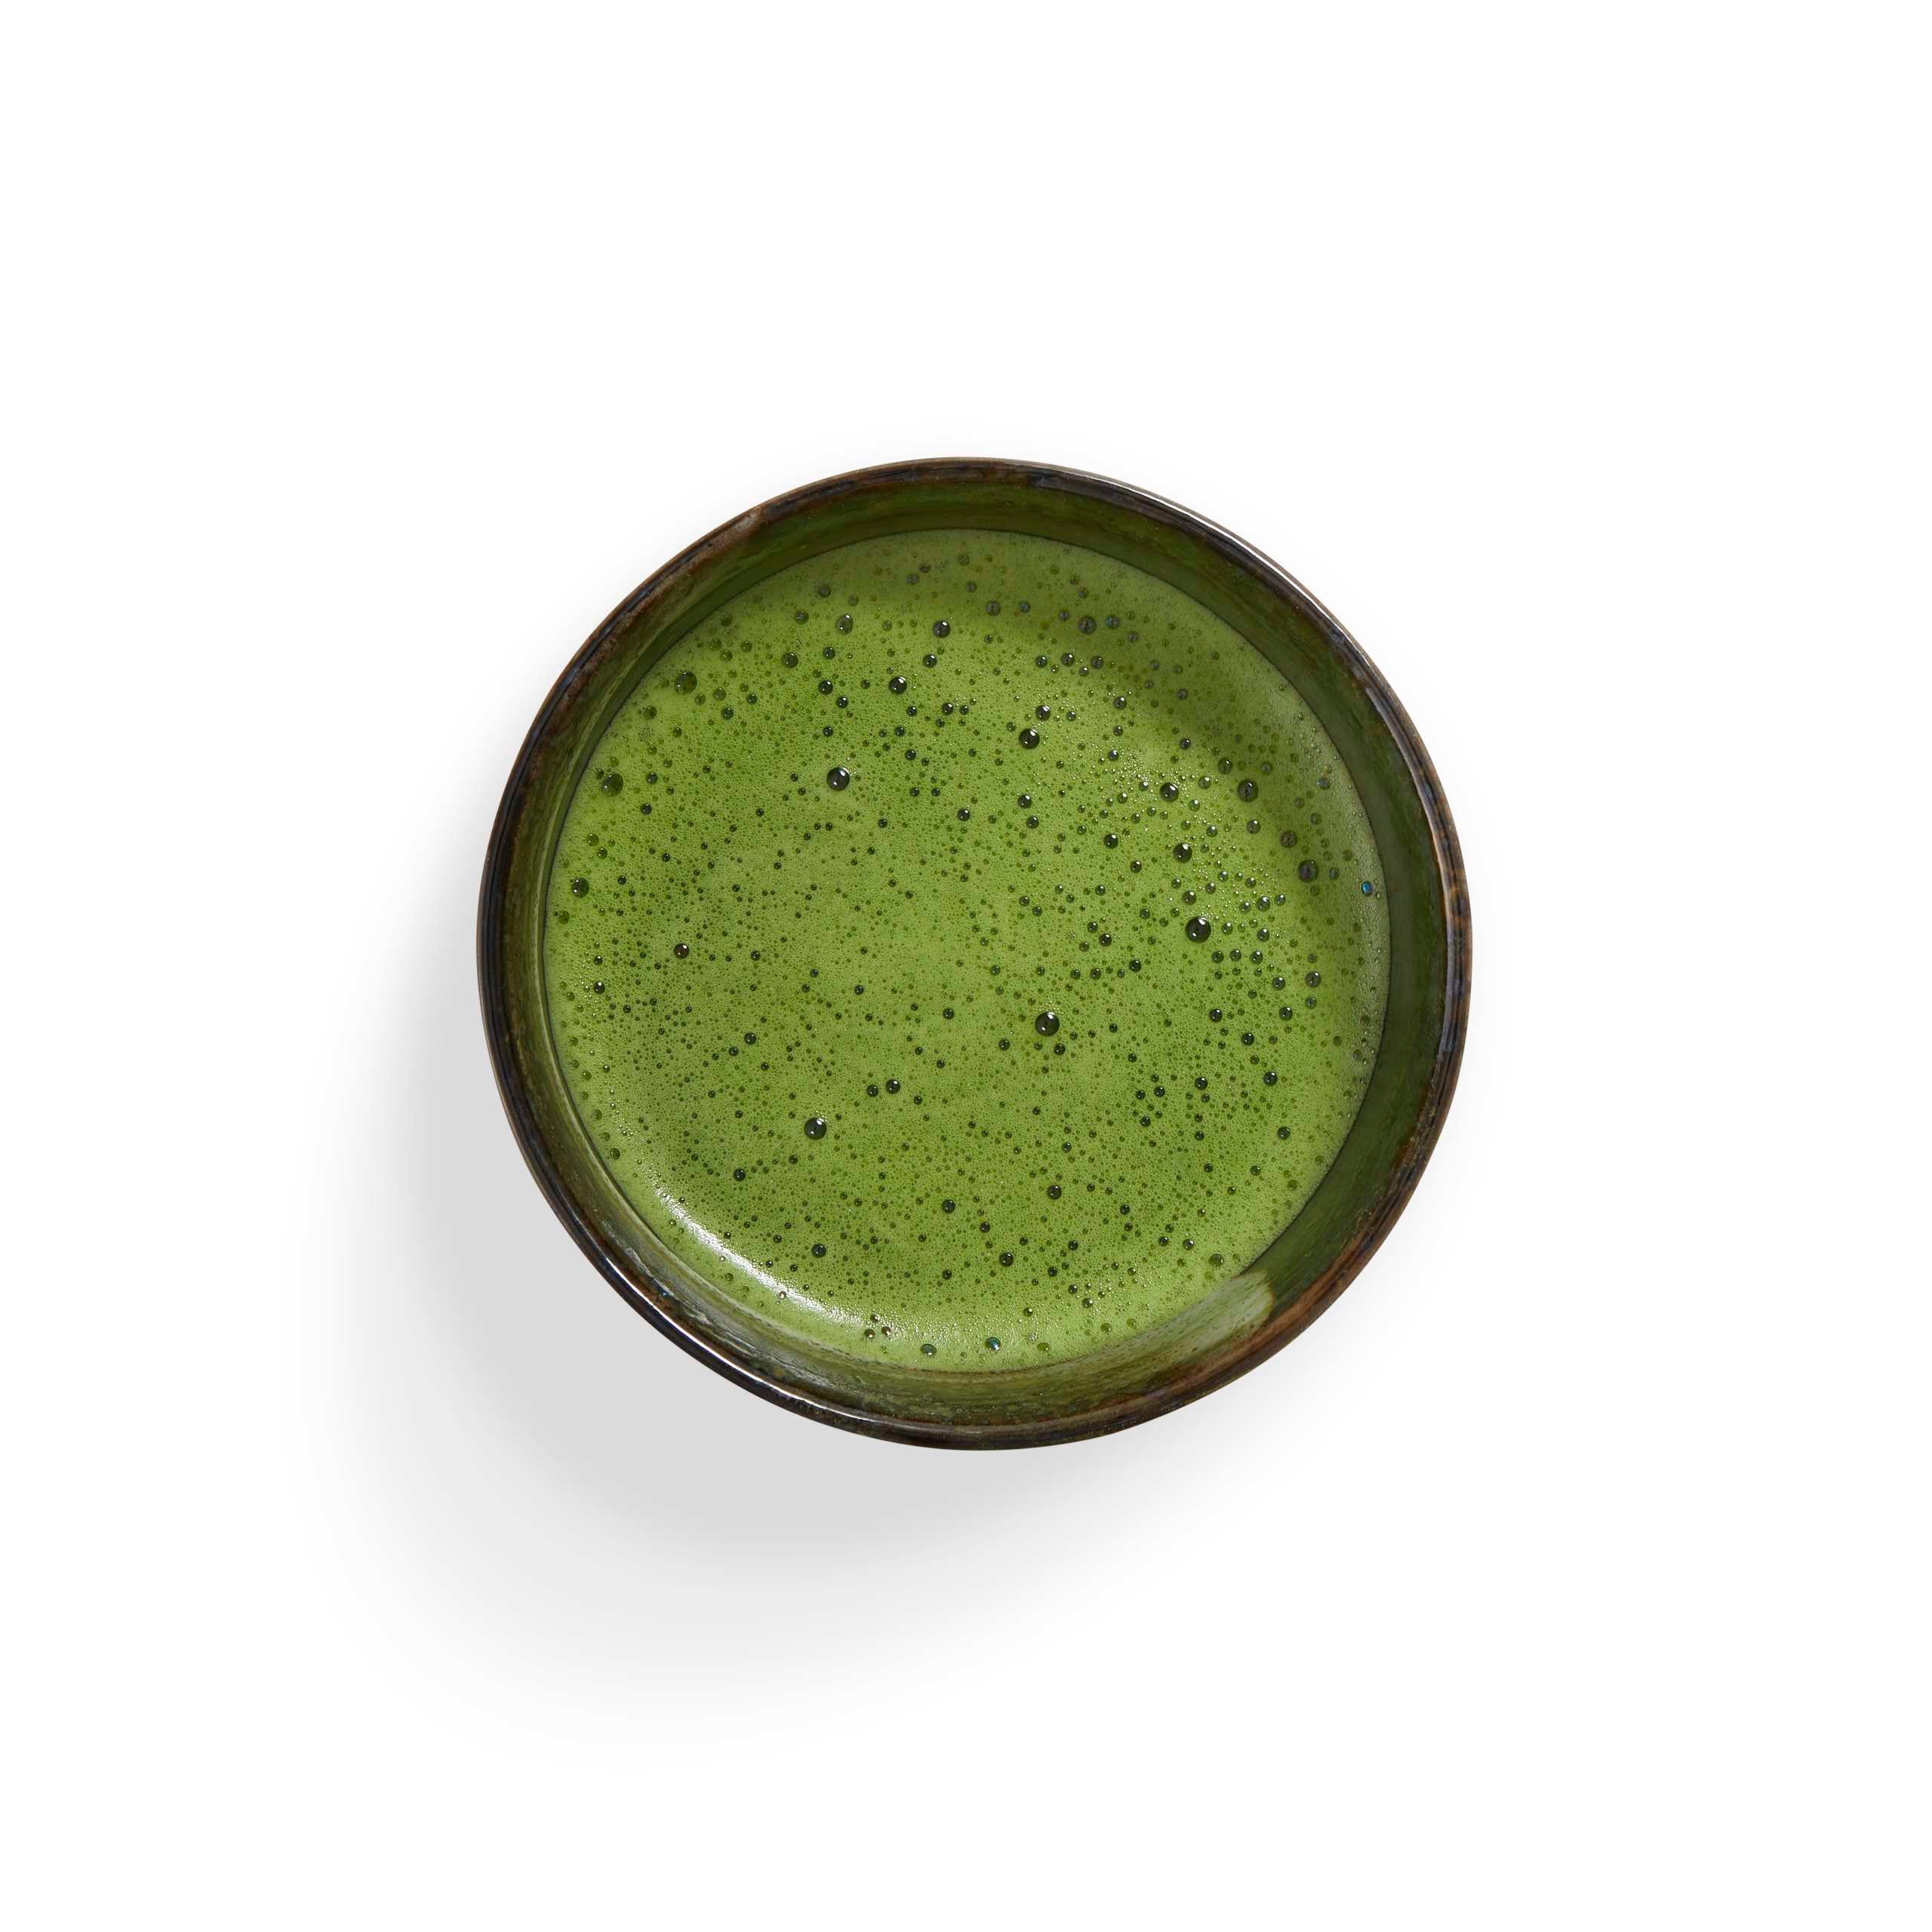 Handcrafted Japanese Ceramic Matcha Bowl with matcha brewed